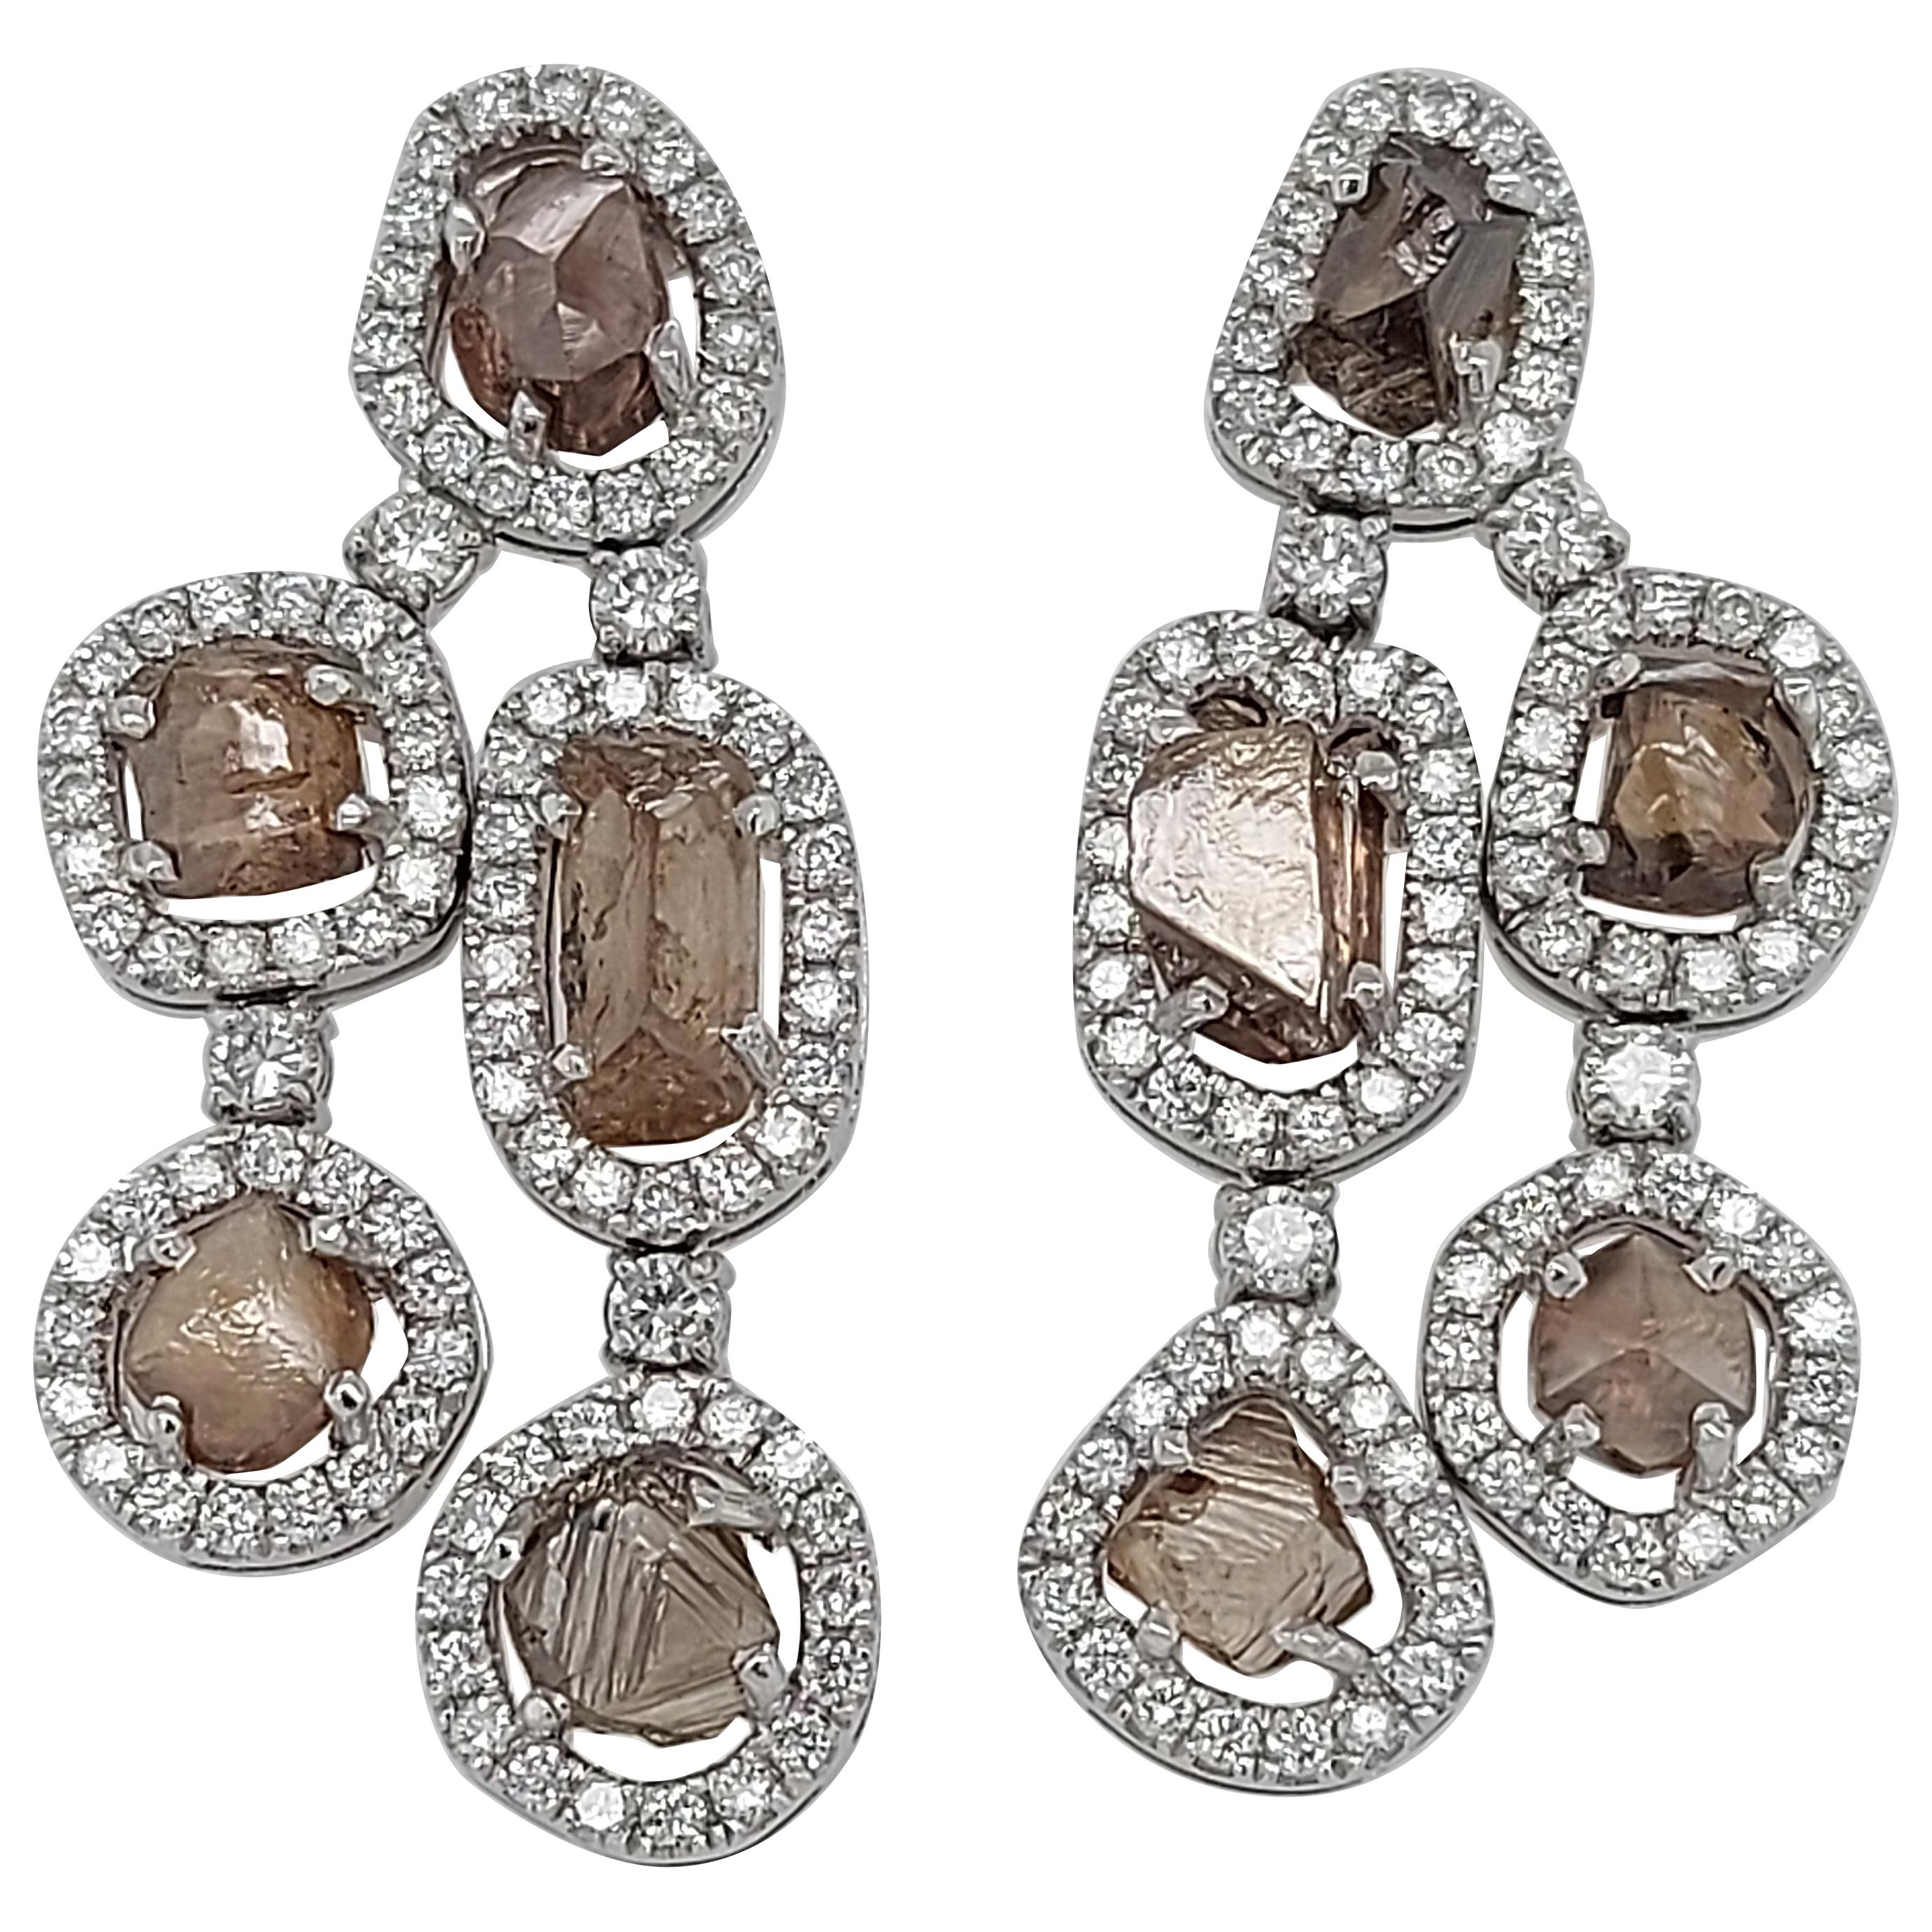 Magnificent 18kt Gold Chandelier Earrings with 13.22 Ct Natural Rough Diamonds For Sale